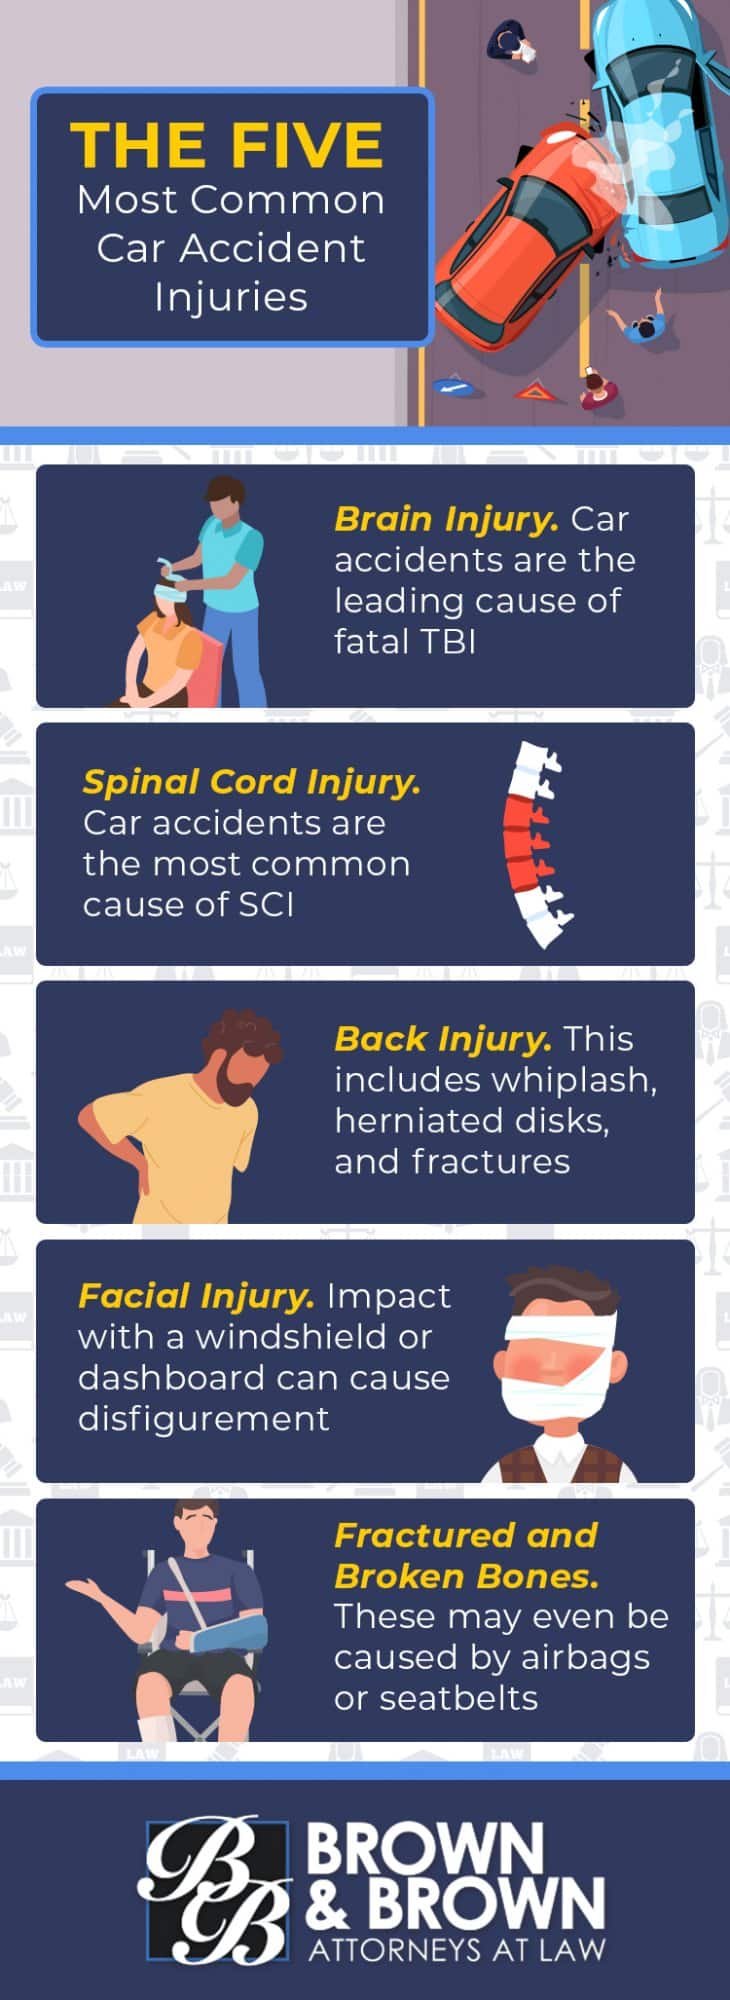 Five most common car accident injuries